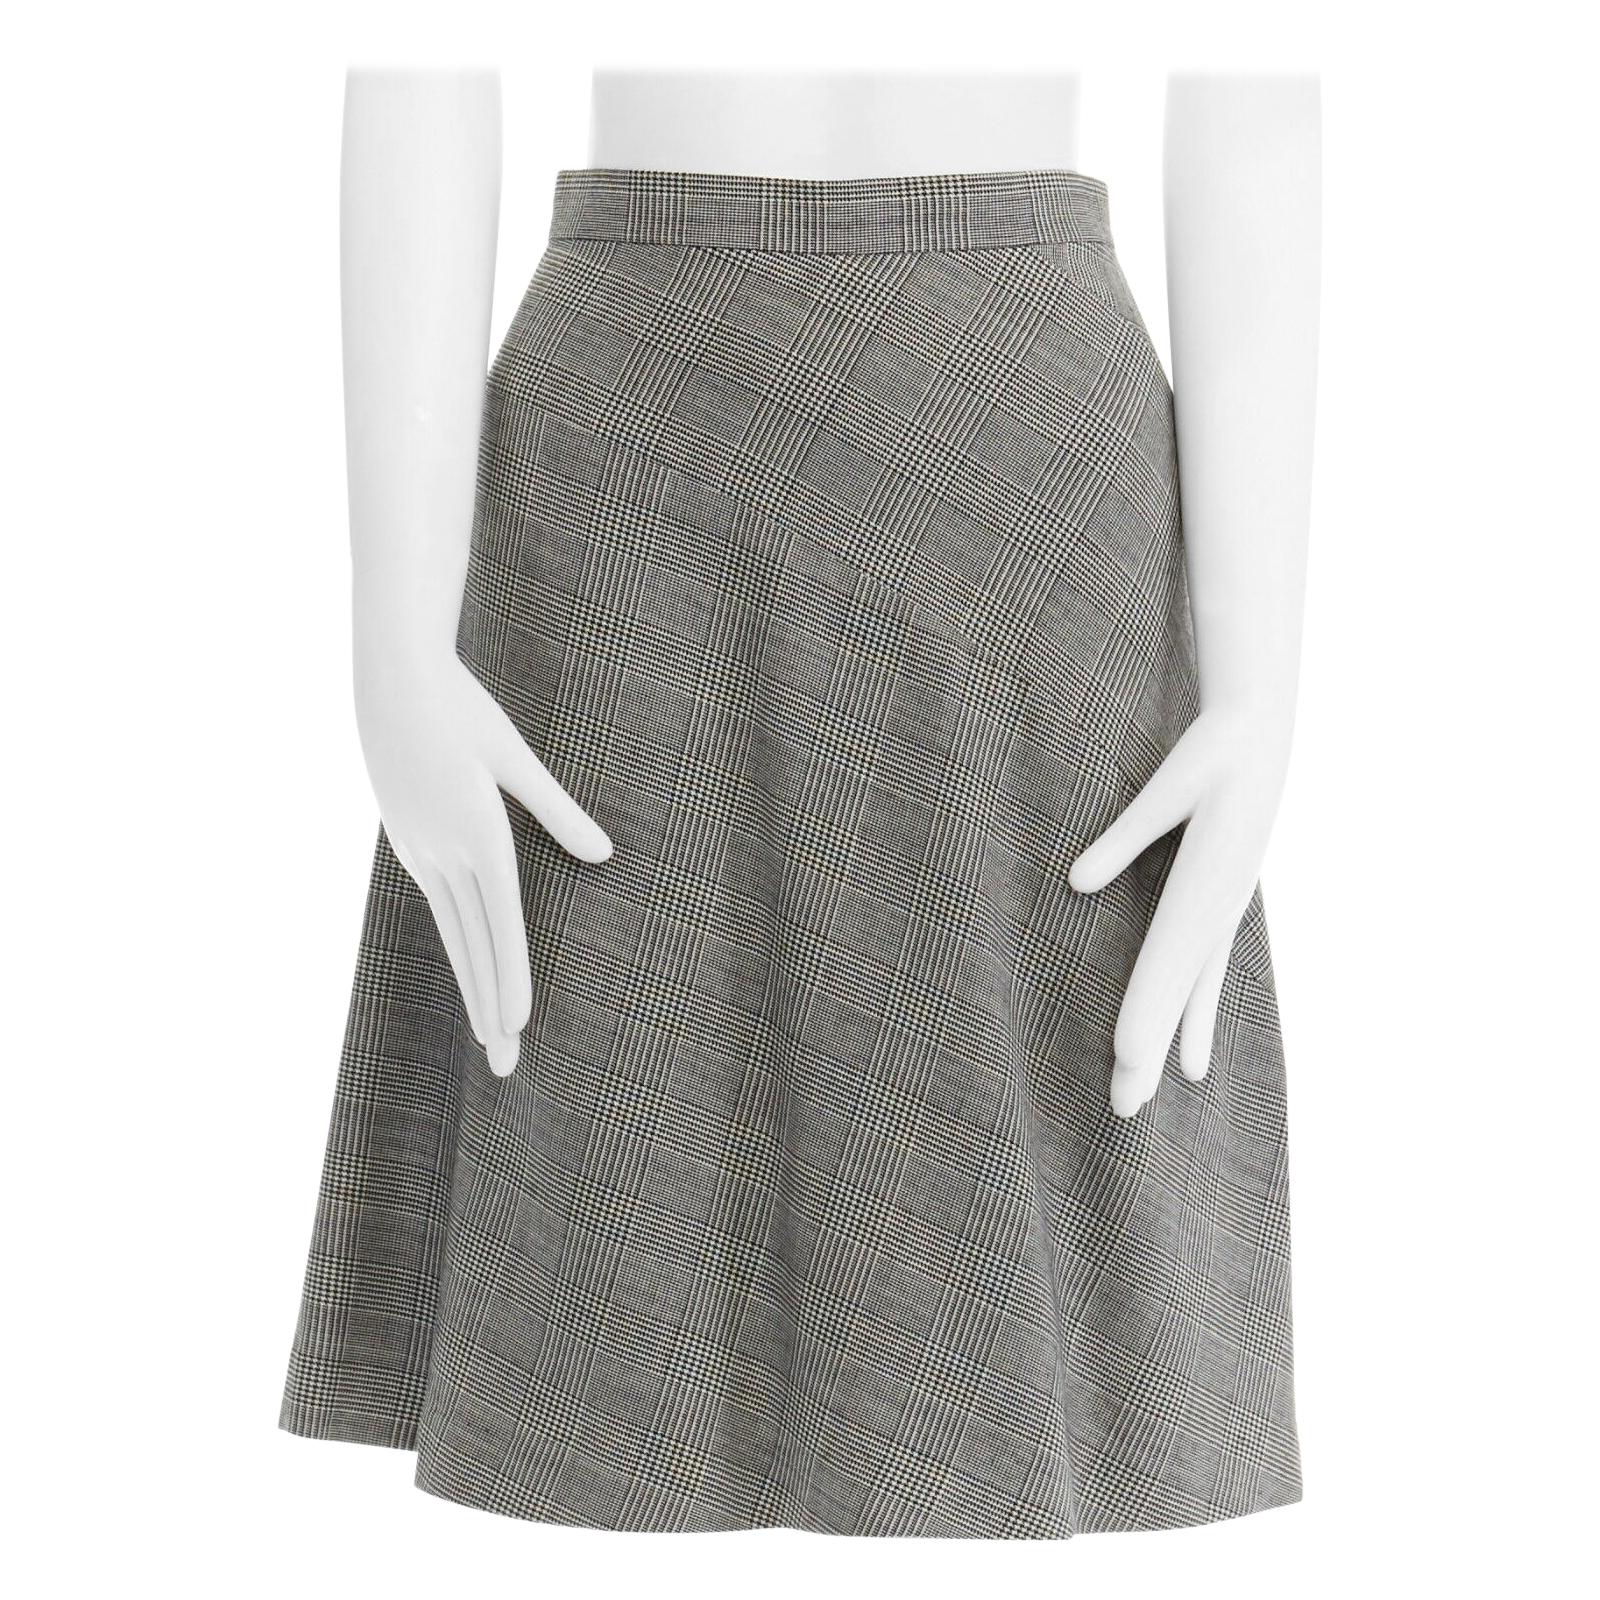 COMME DES GARCONS grey Prince of Wales check curved seam A-line skirt 26"